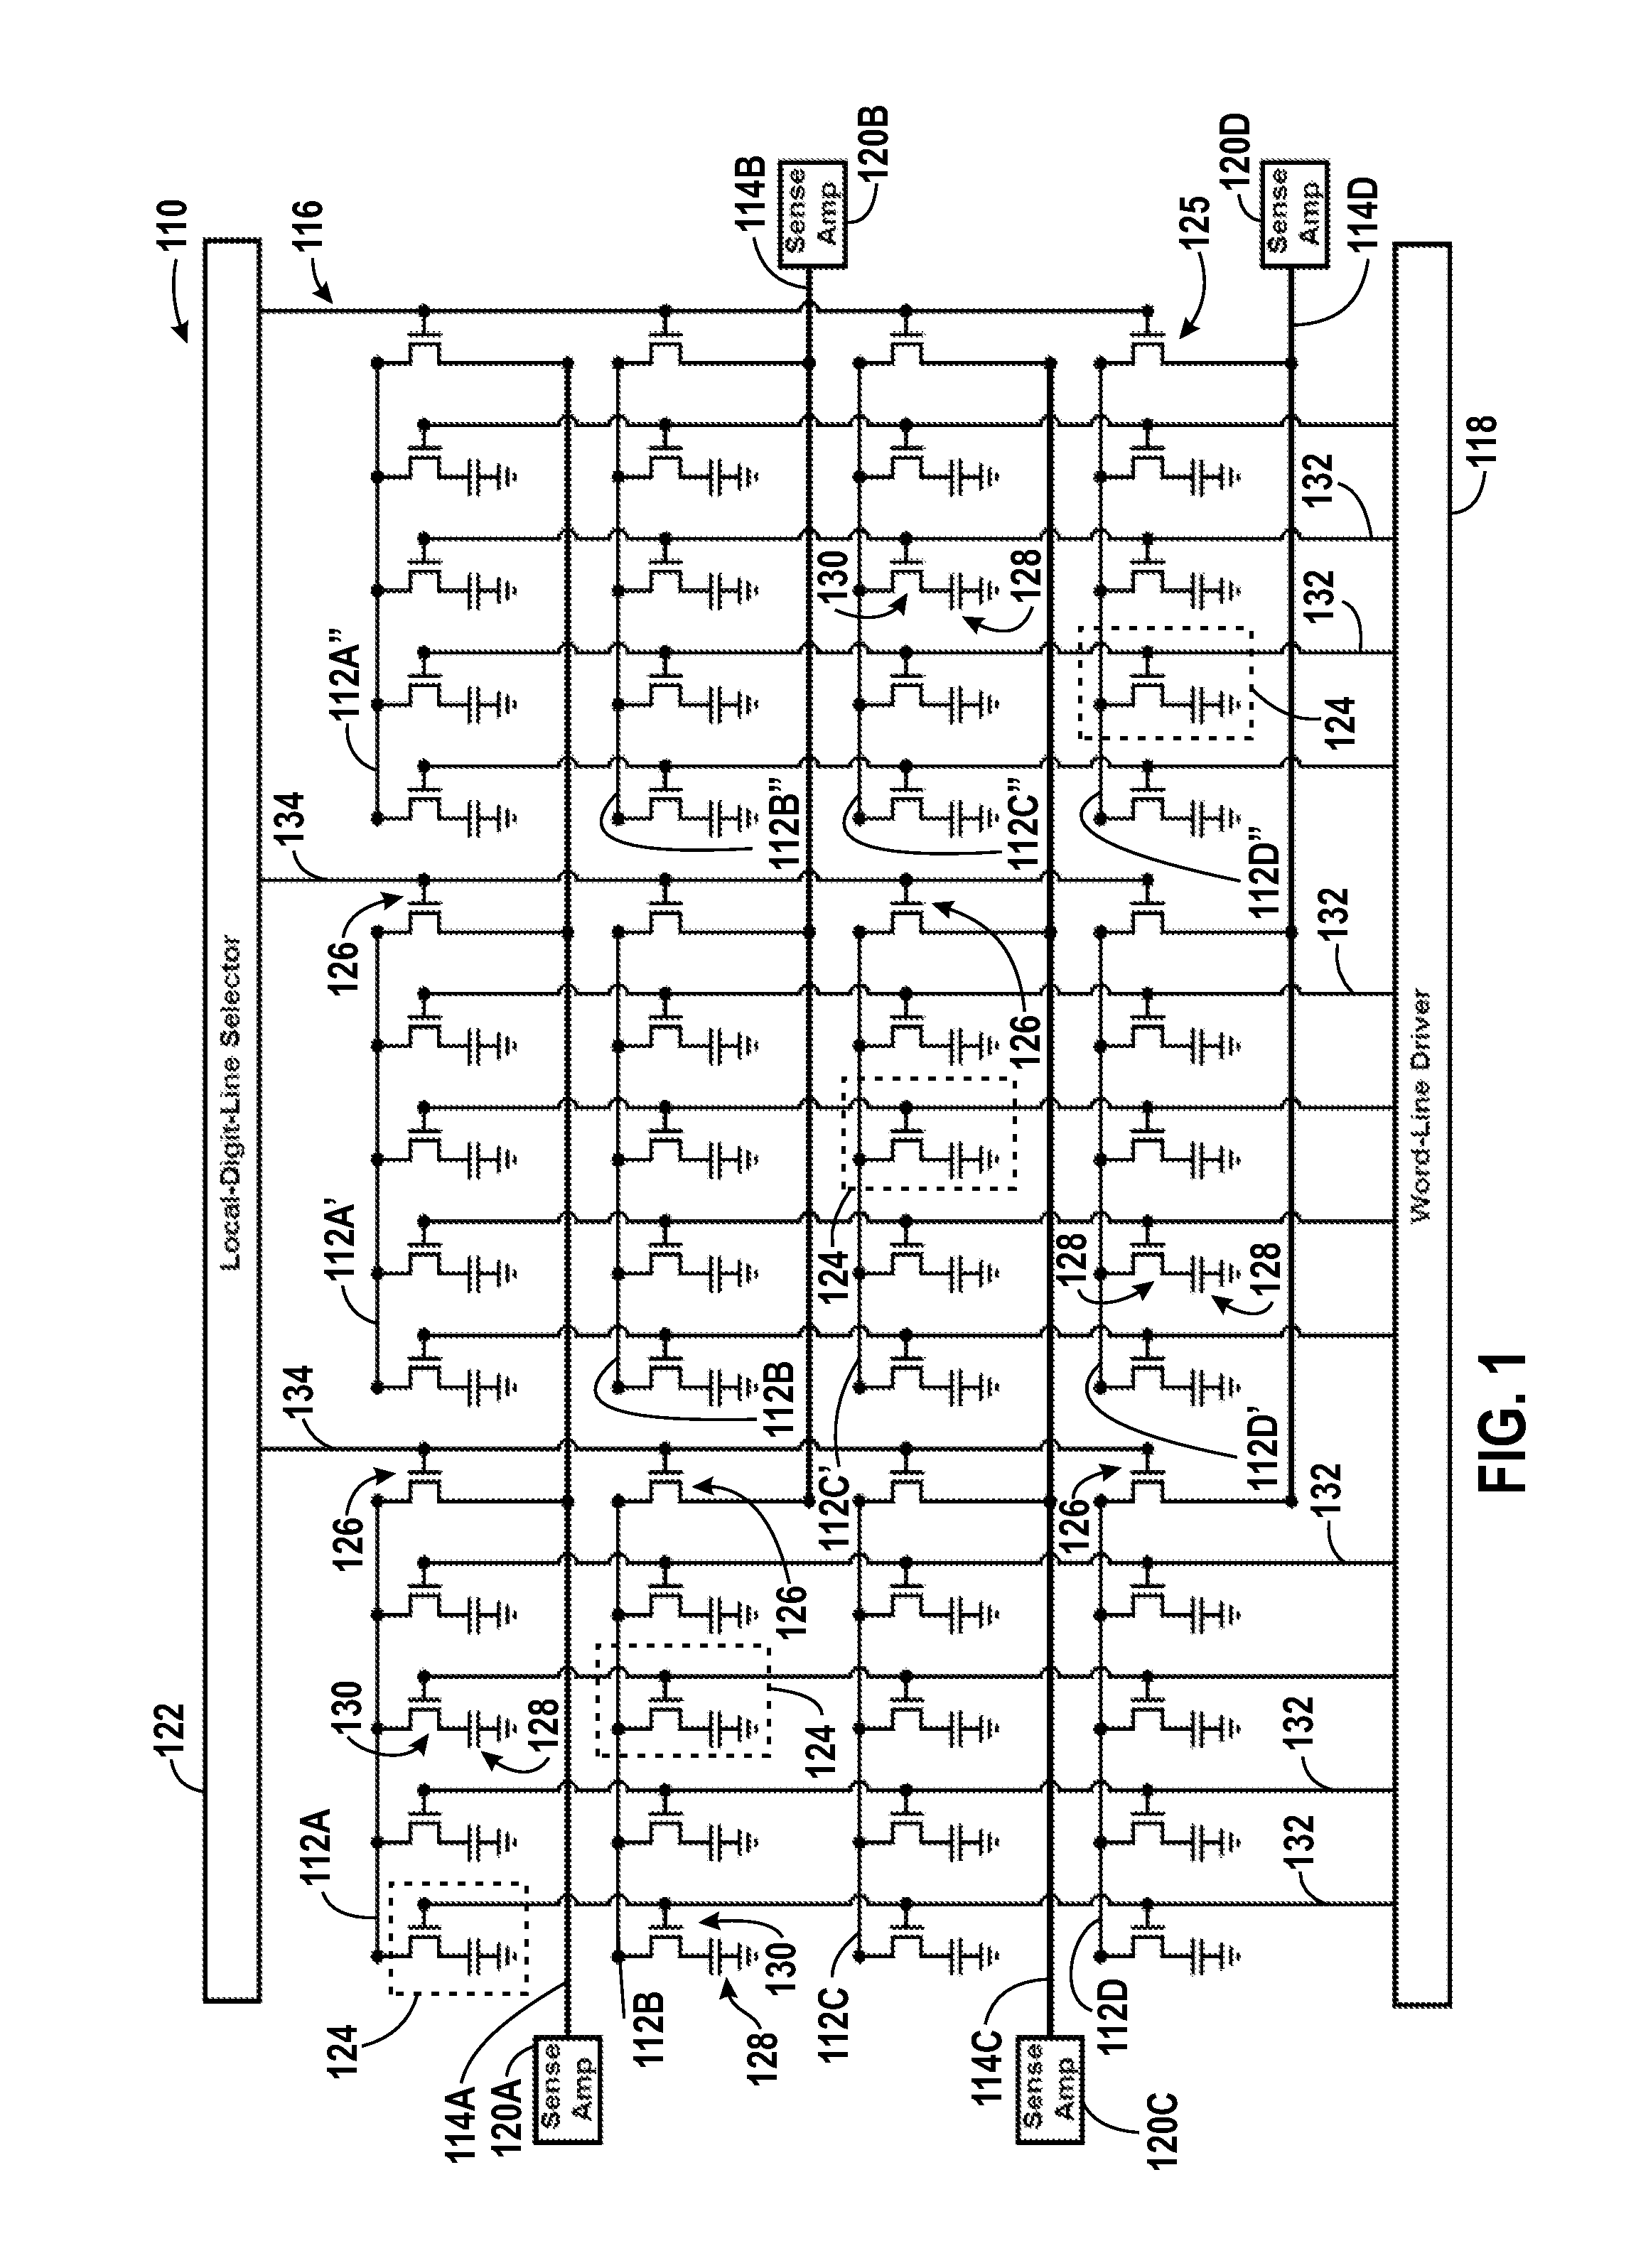 Systems and devices including local data lines and methods of using, making, and operating the same